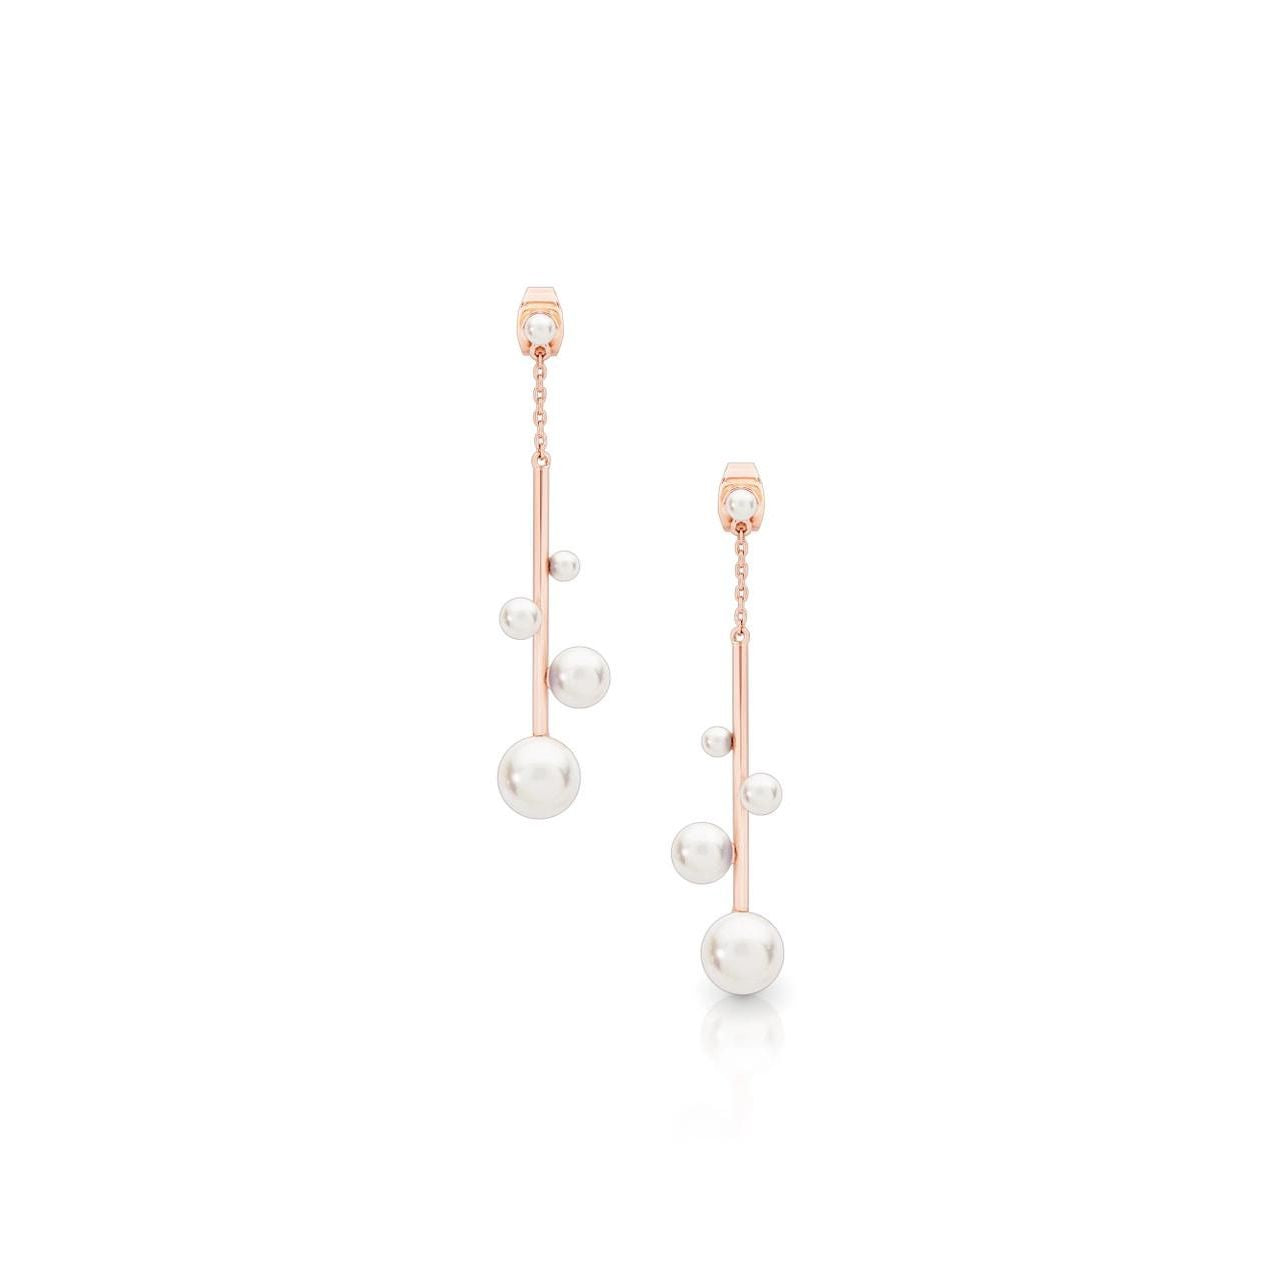 Romi Dublin Rose Gold Pearl Bar Earrings  The classics are what draw us back time and time again and nothing is more classic than Pearls. We were inspired with this collection to bring a modern twist to a timeless classic.